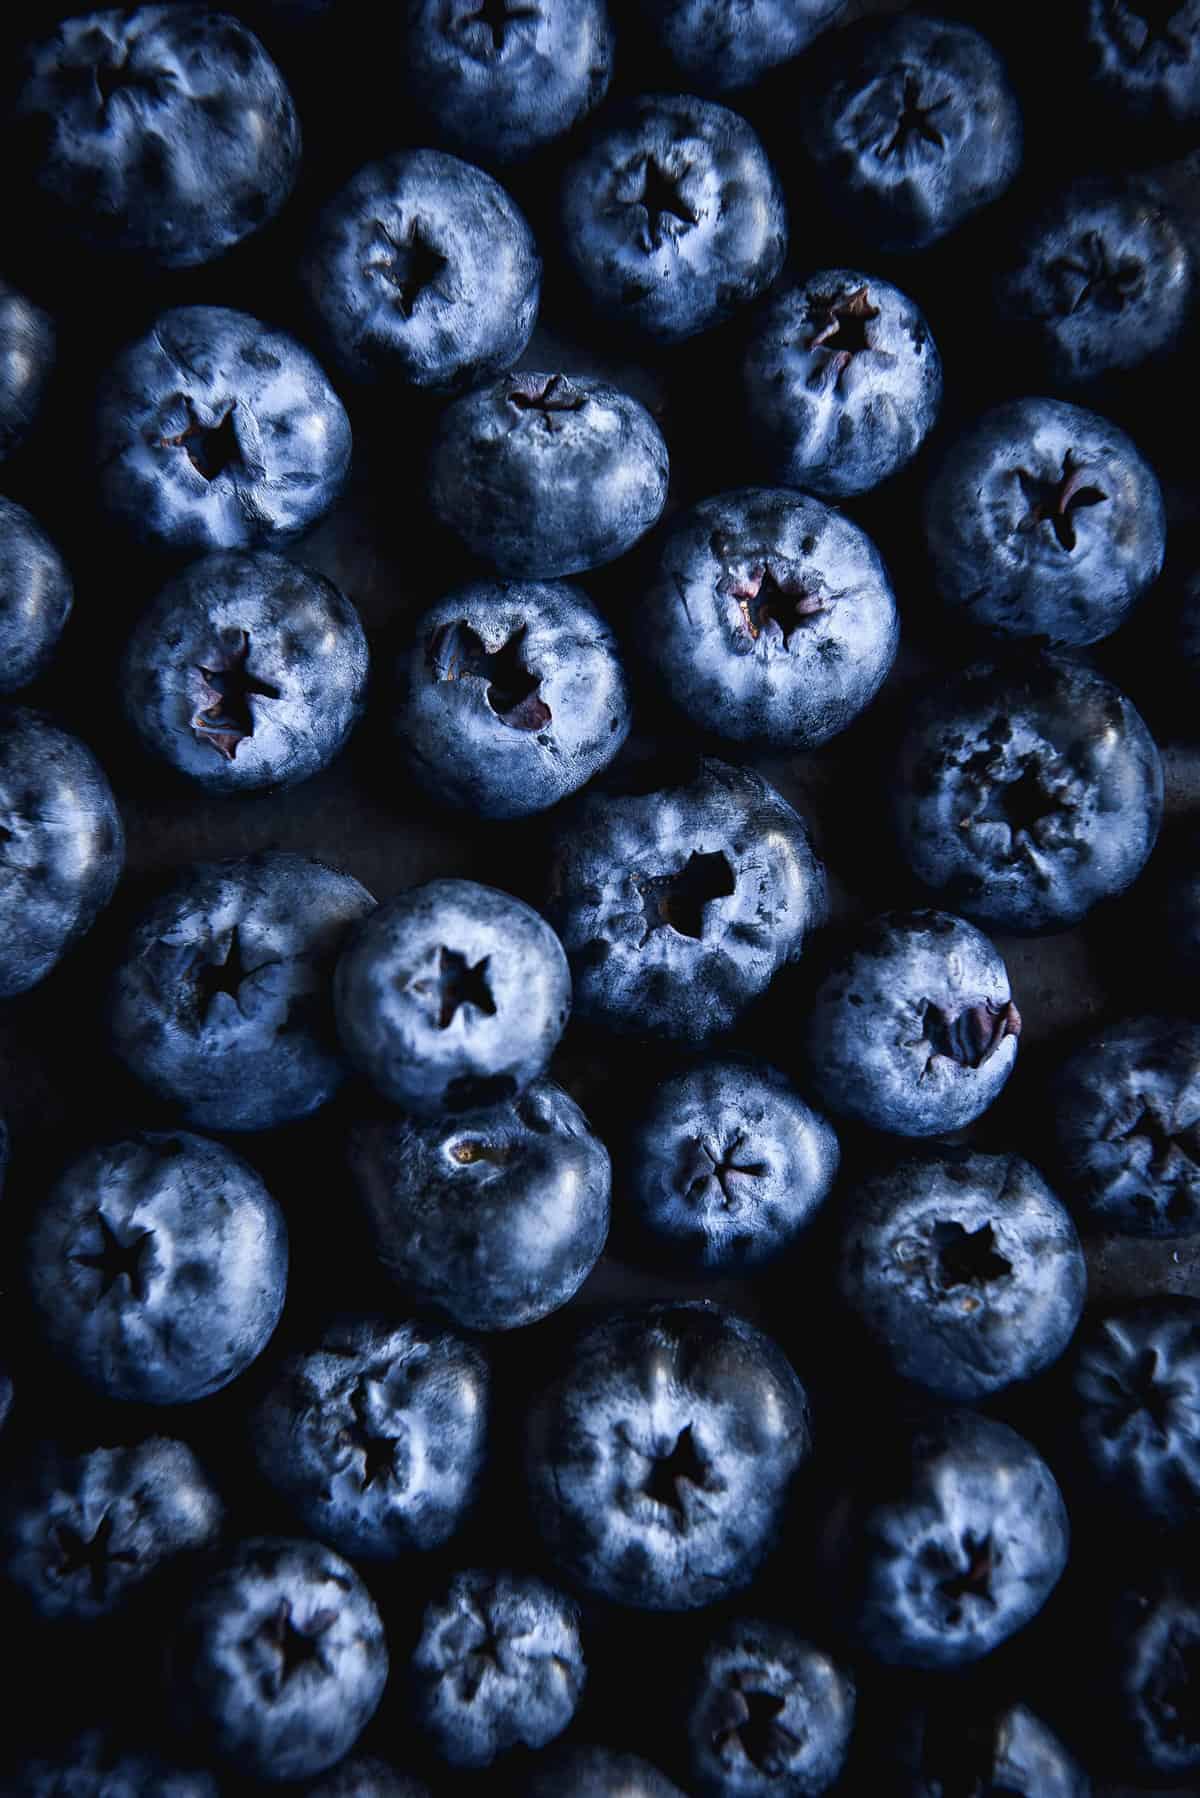 An aerial macro image of blueberries grouped together